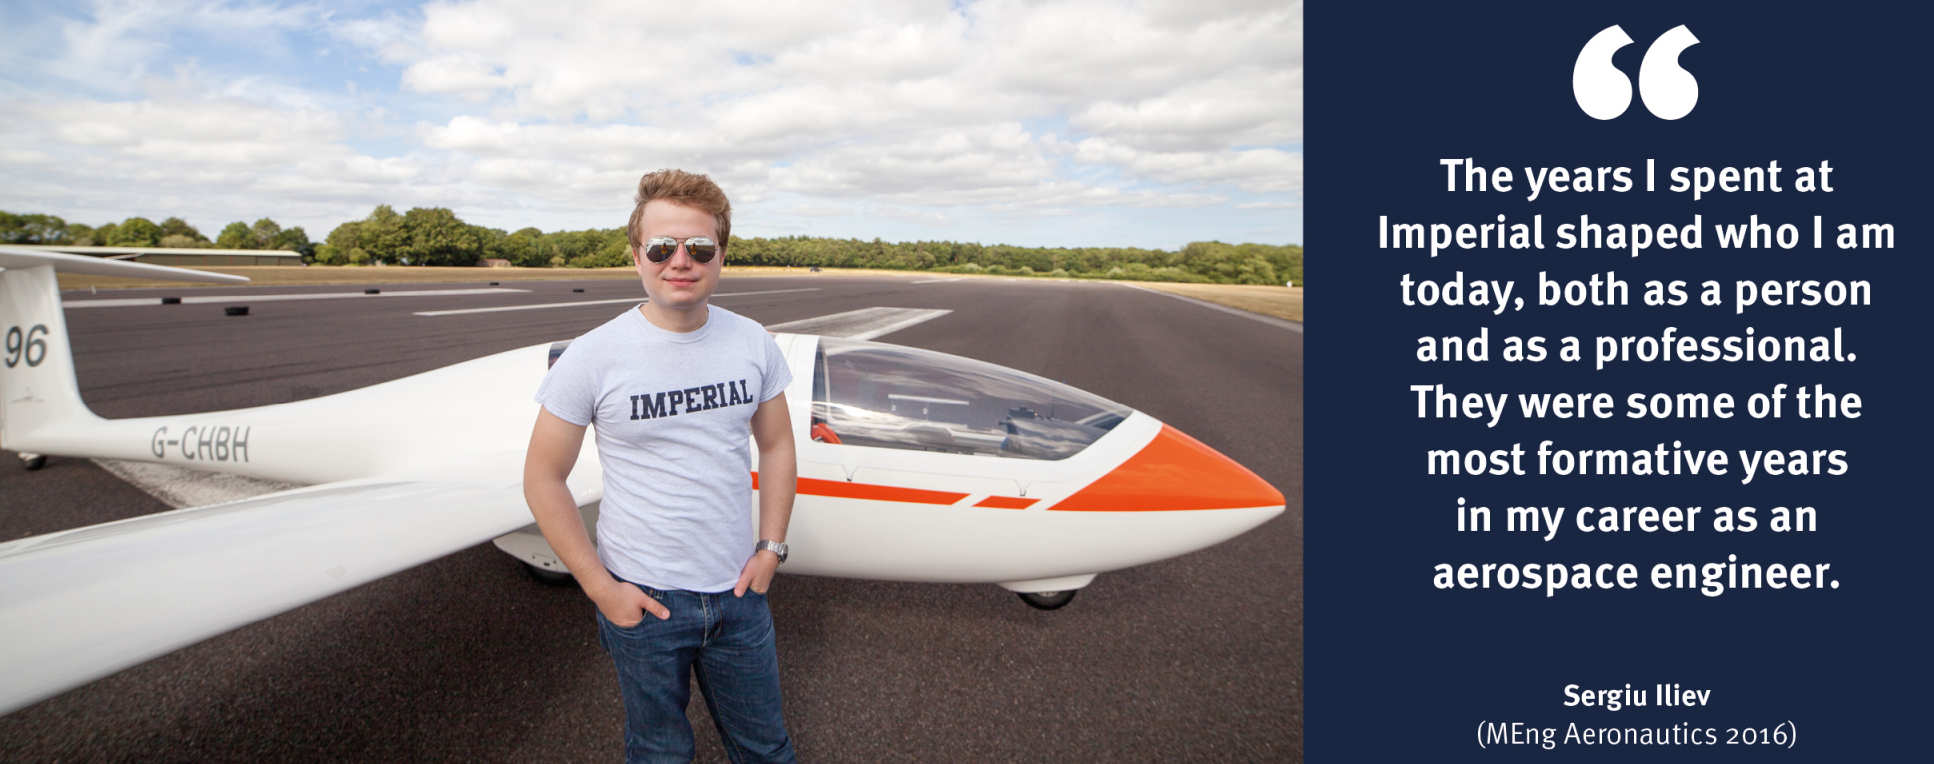 Example of a slide - photo of an alumnus in front of a plane with a caption